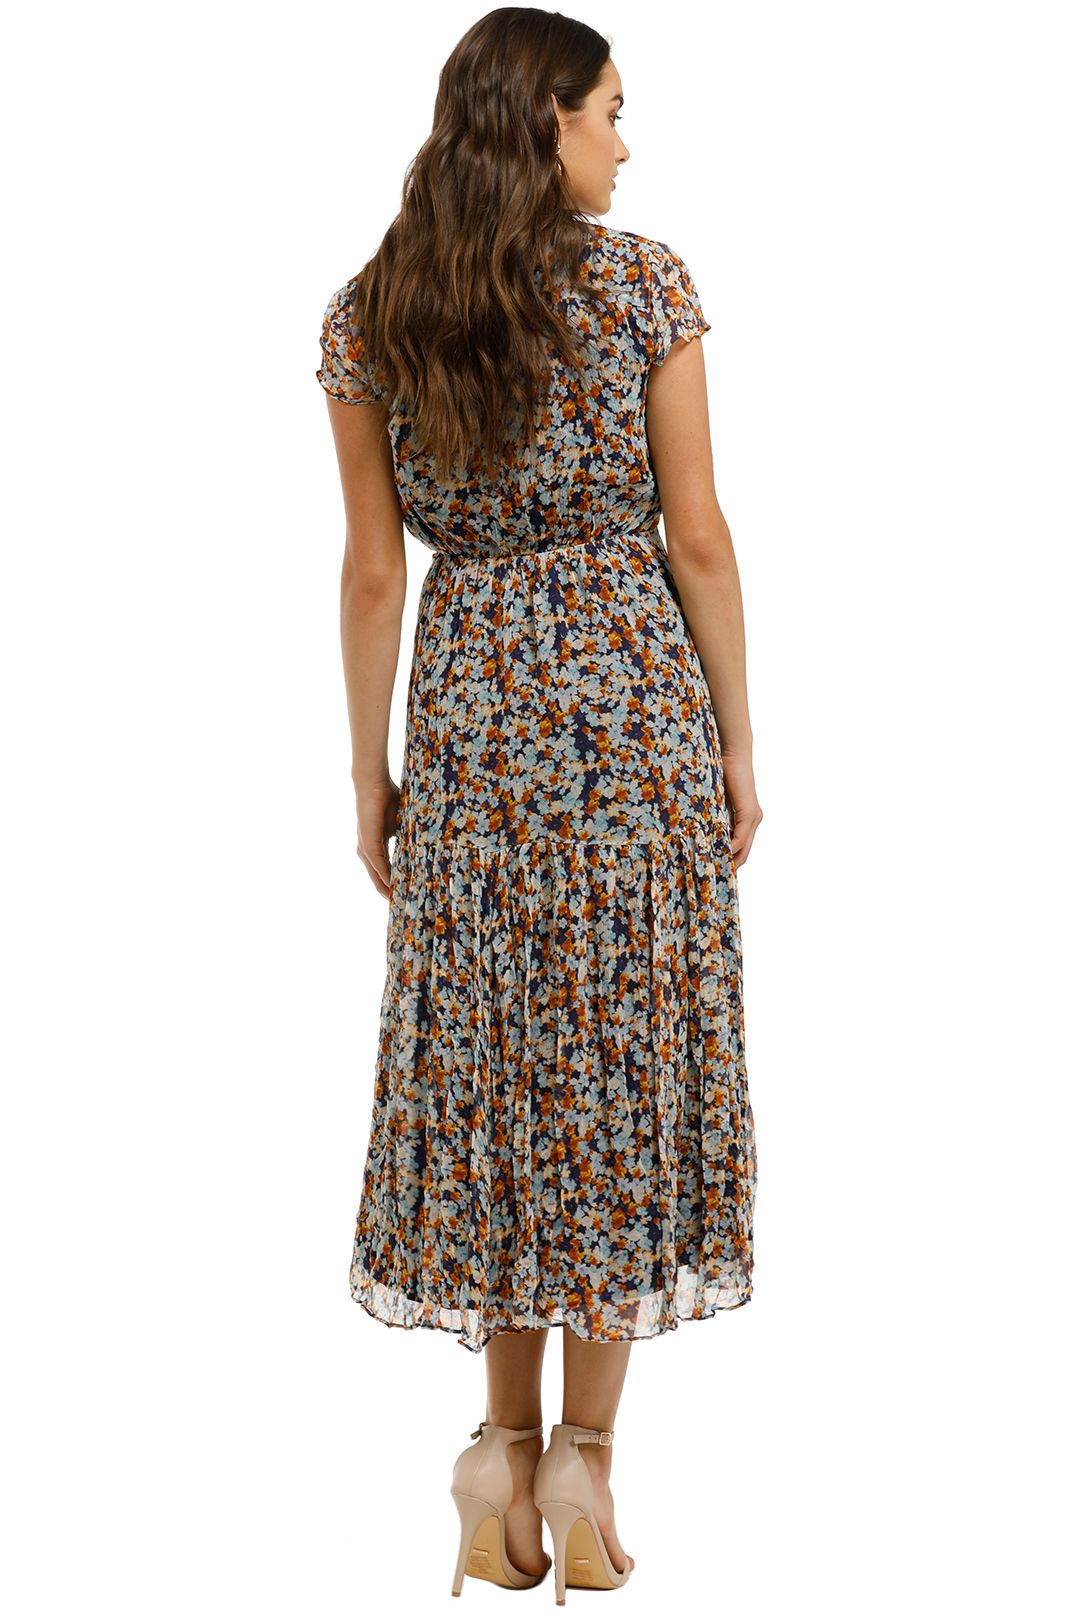 Dixie Midi Dress in Dixie Cup Floral by Stevie May for Rent | GlamCorner